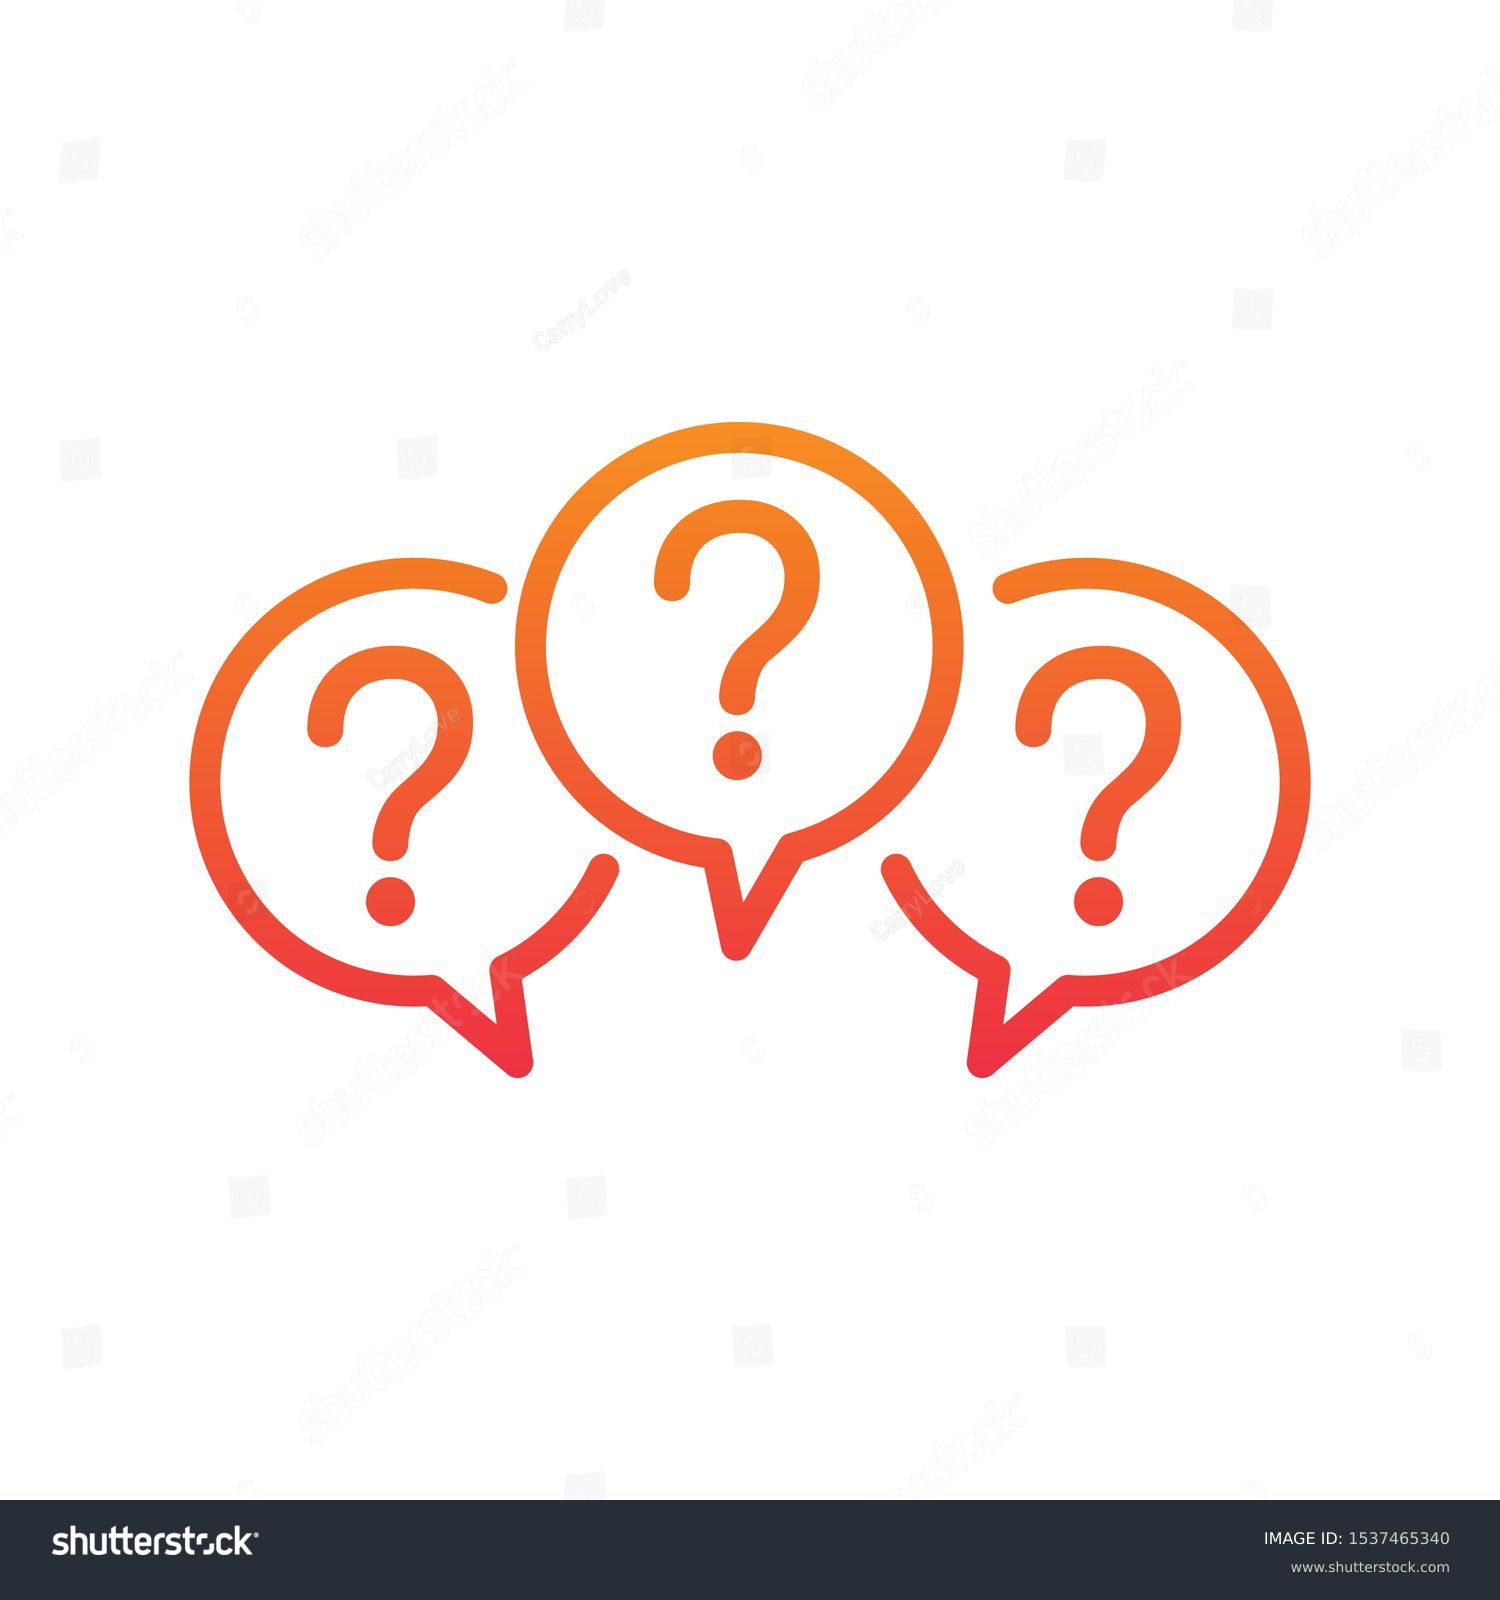 Three linear chat speech message bubbles with question marks. Forum icon. Communication concept. Stock vector illustration isolated on white background. #1537465340